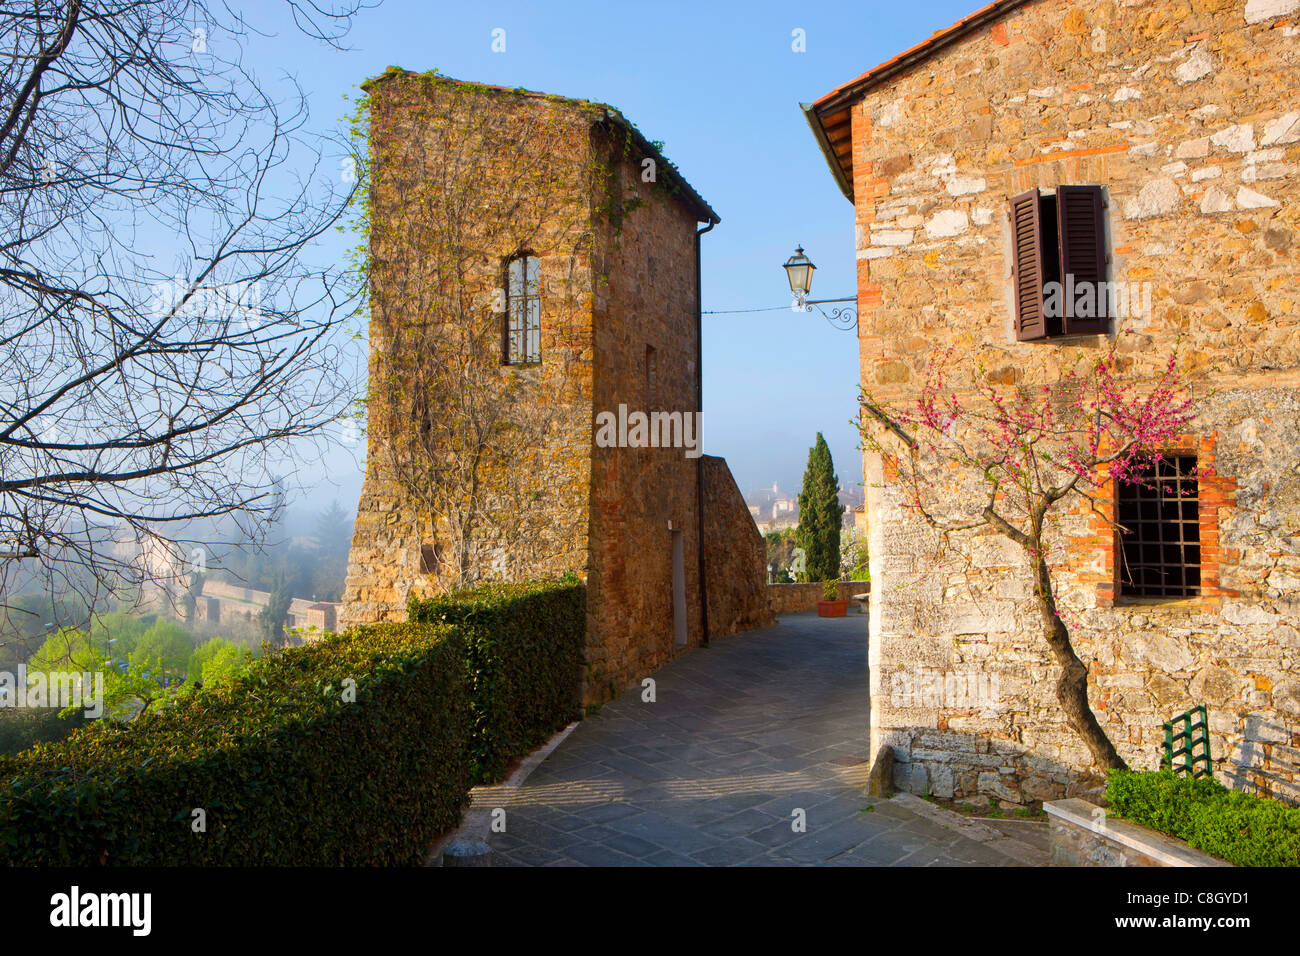 San Quirico d'Orcia, Italy, Europe, Tuscany, town, city, Old Town, lane, houses, homes, Stock Photo